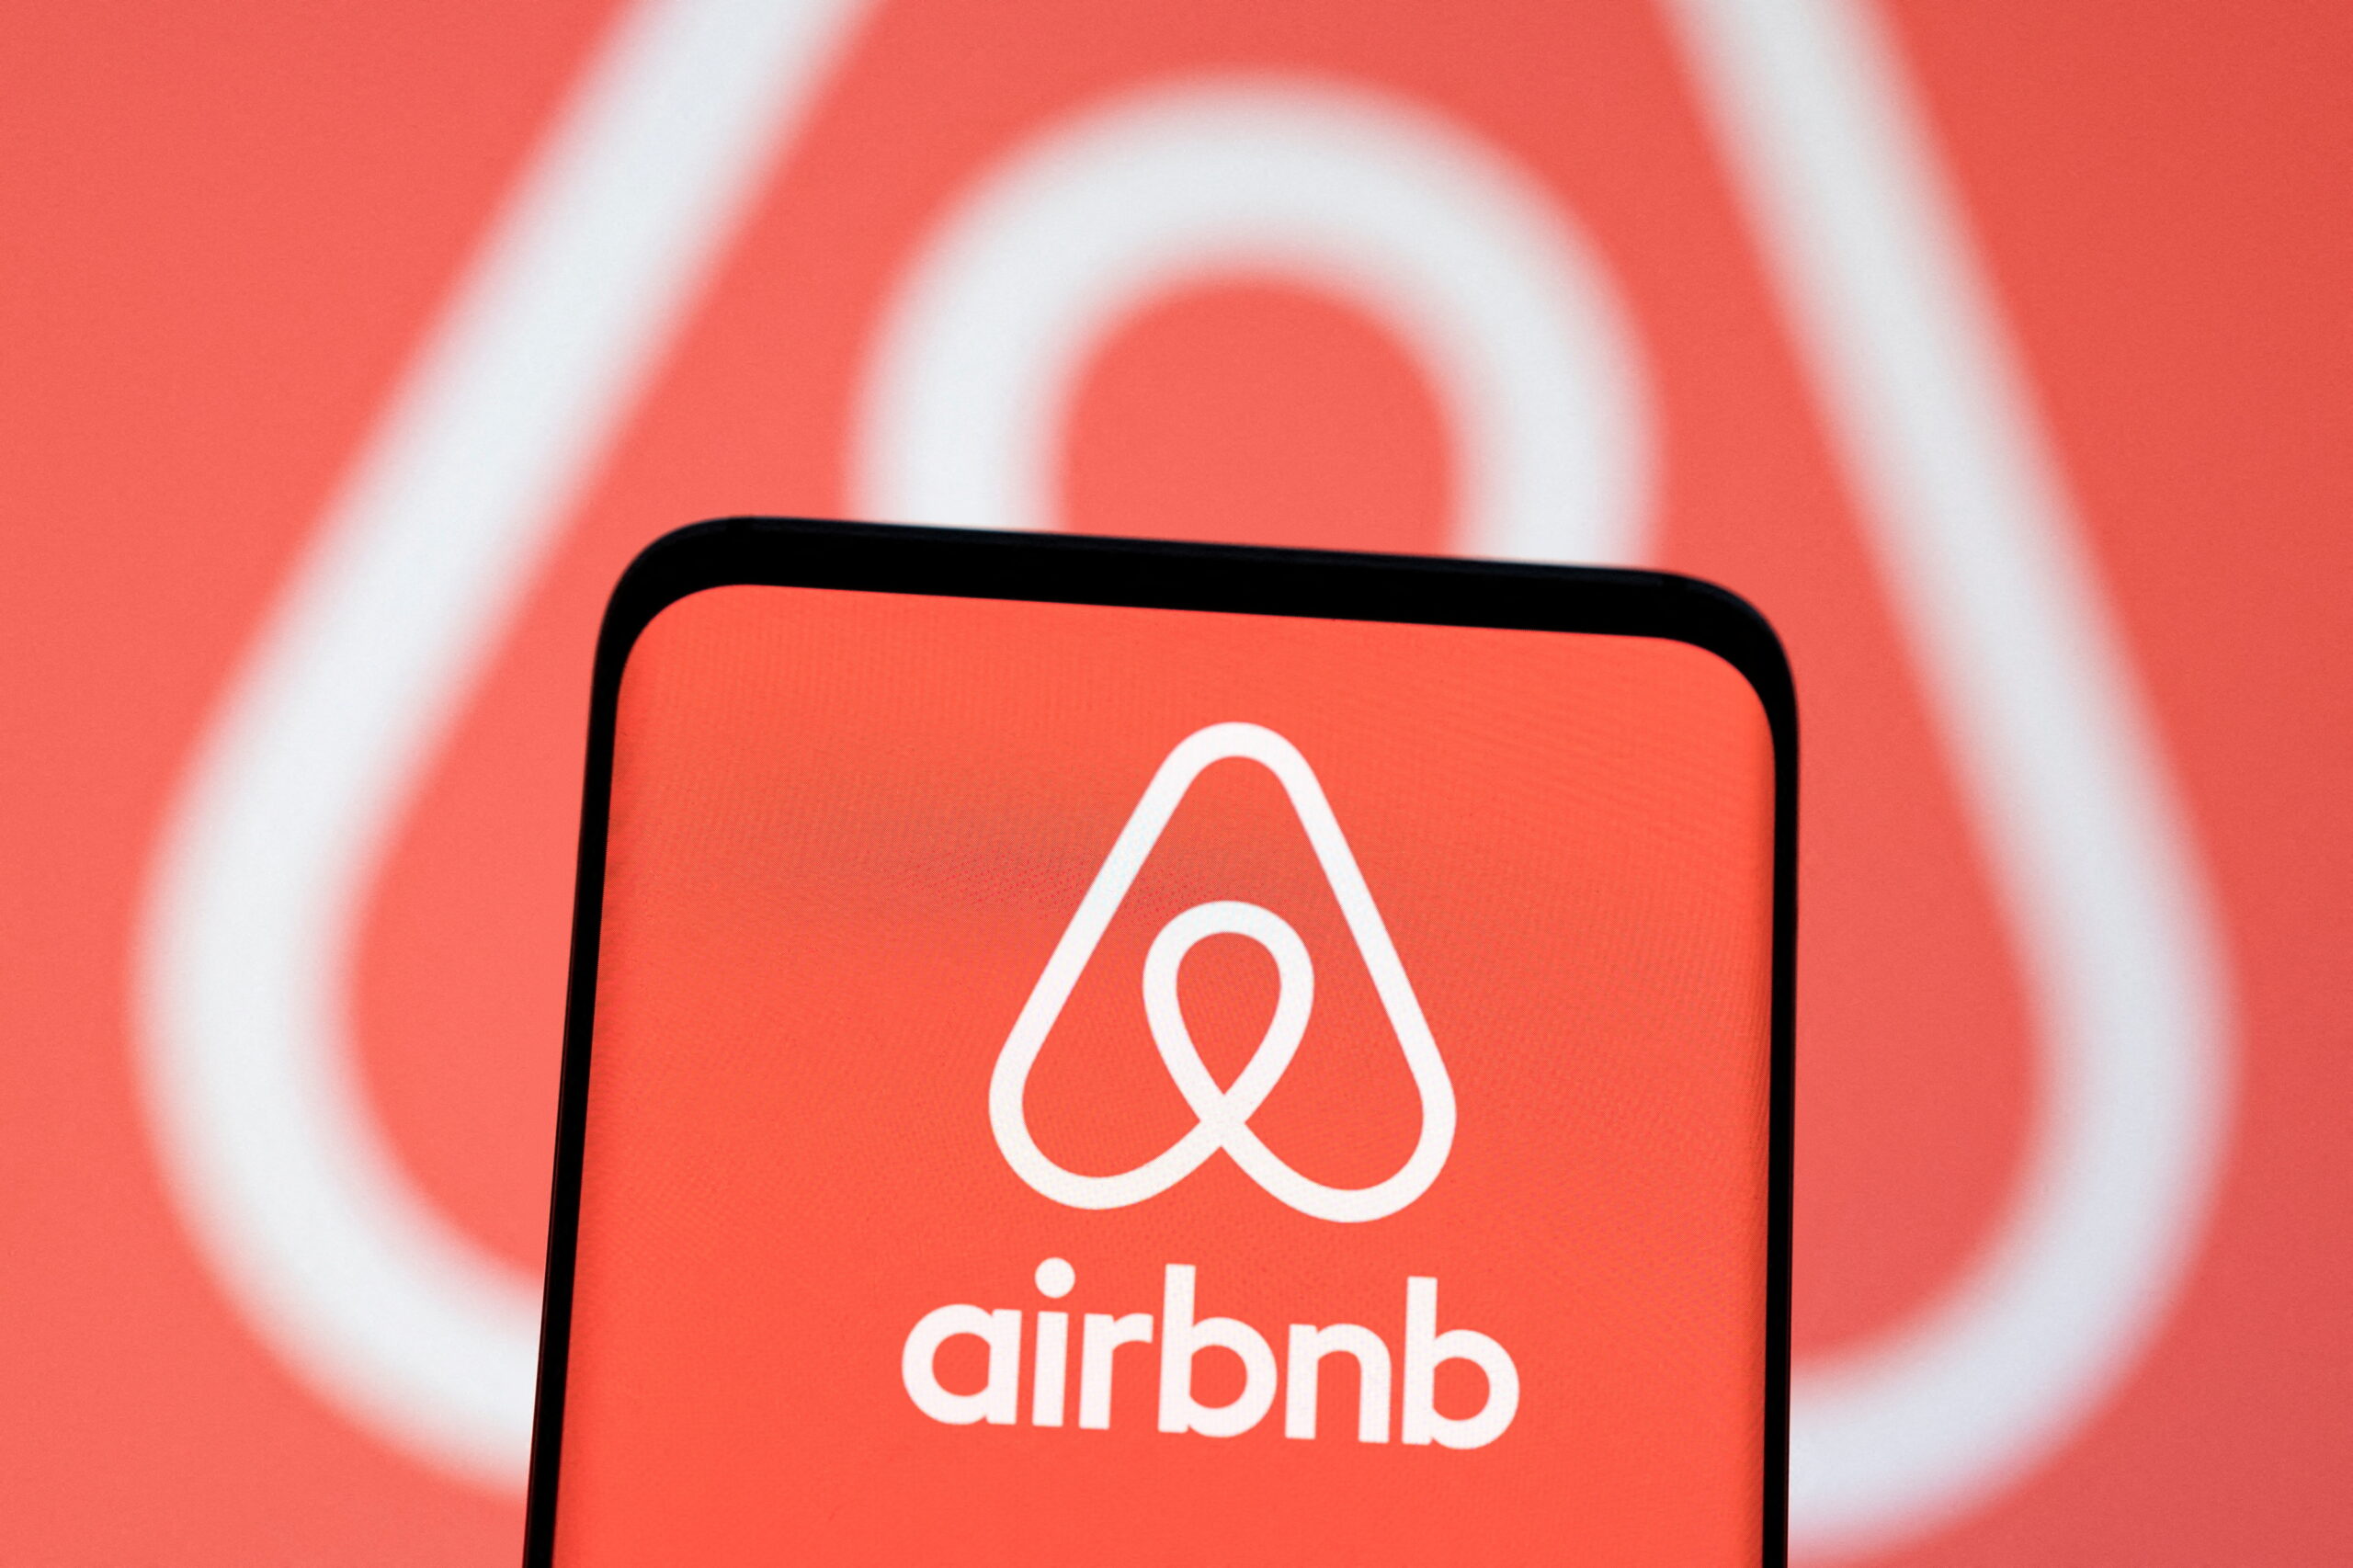 Nights booked for International travel by Indian guests more than doubled: Airbnb